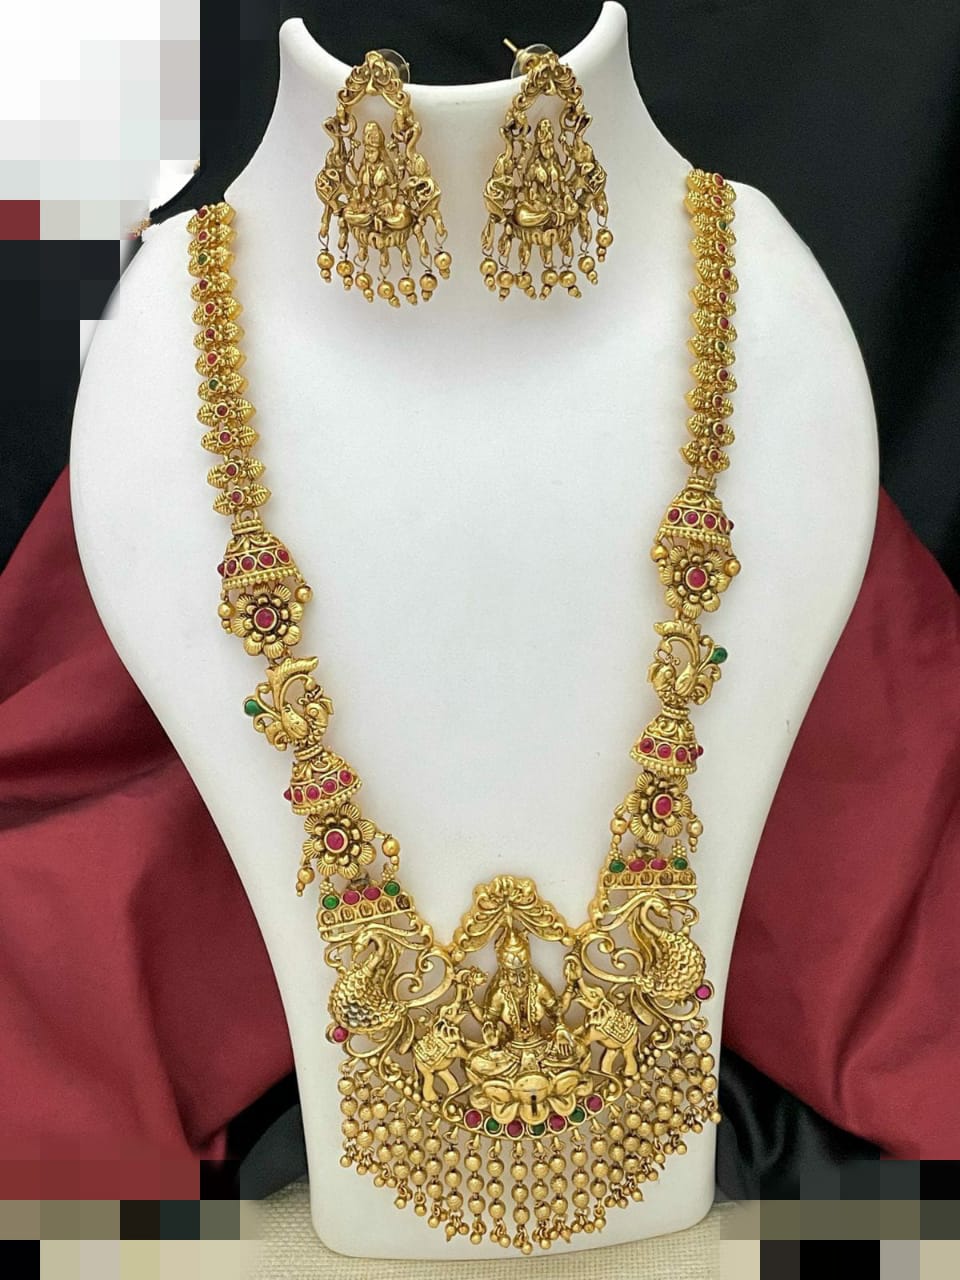 Long Necklace with Beads | Indian Fashion Jewelry | Exotic India Art